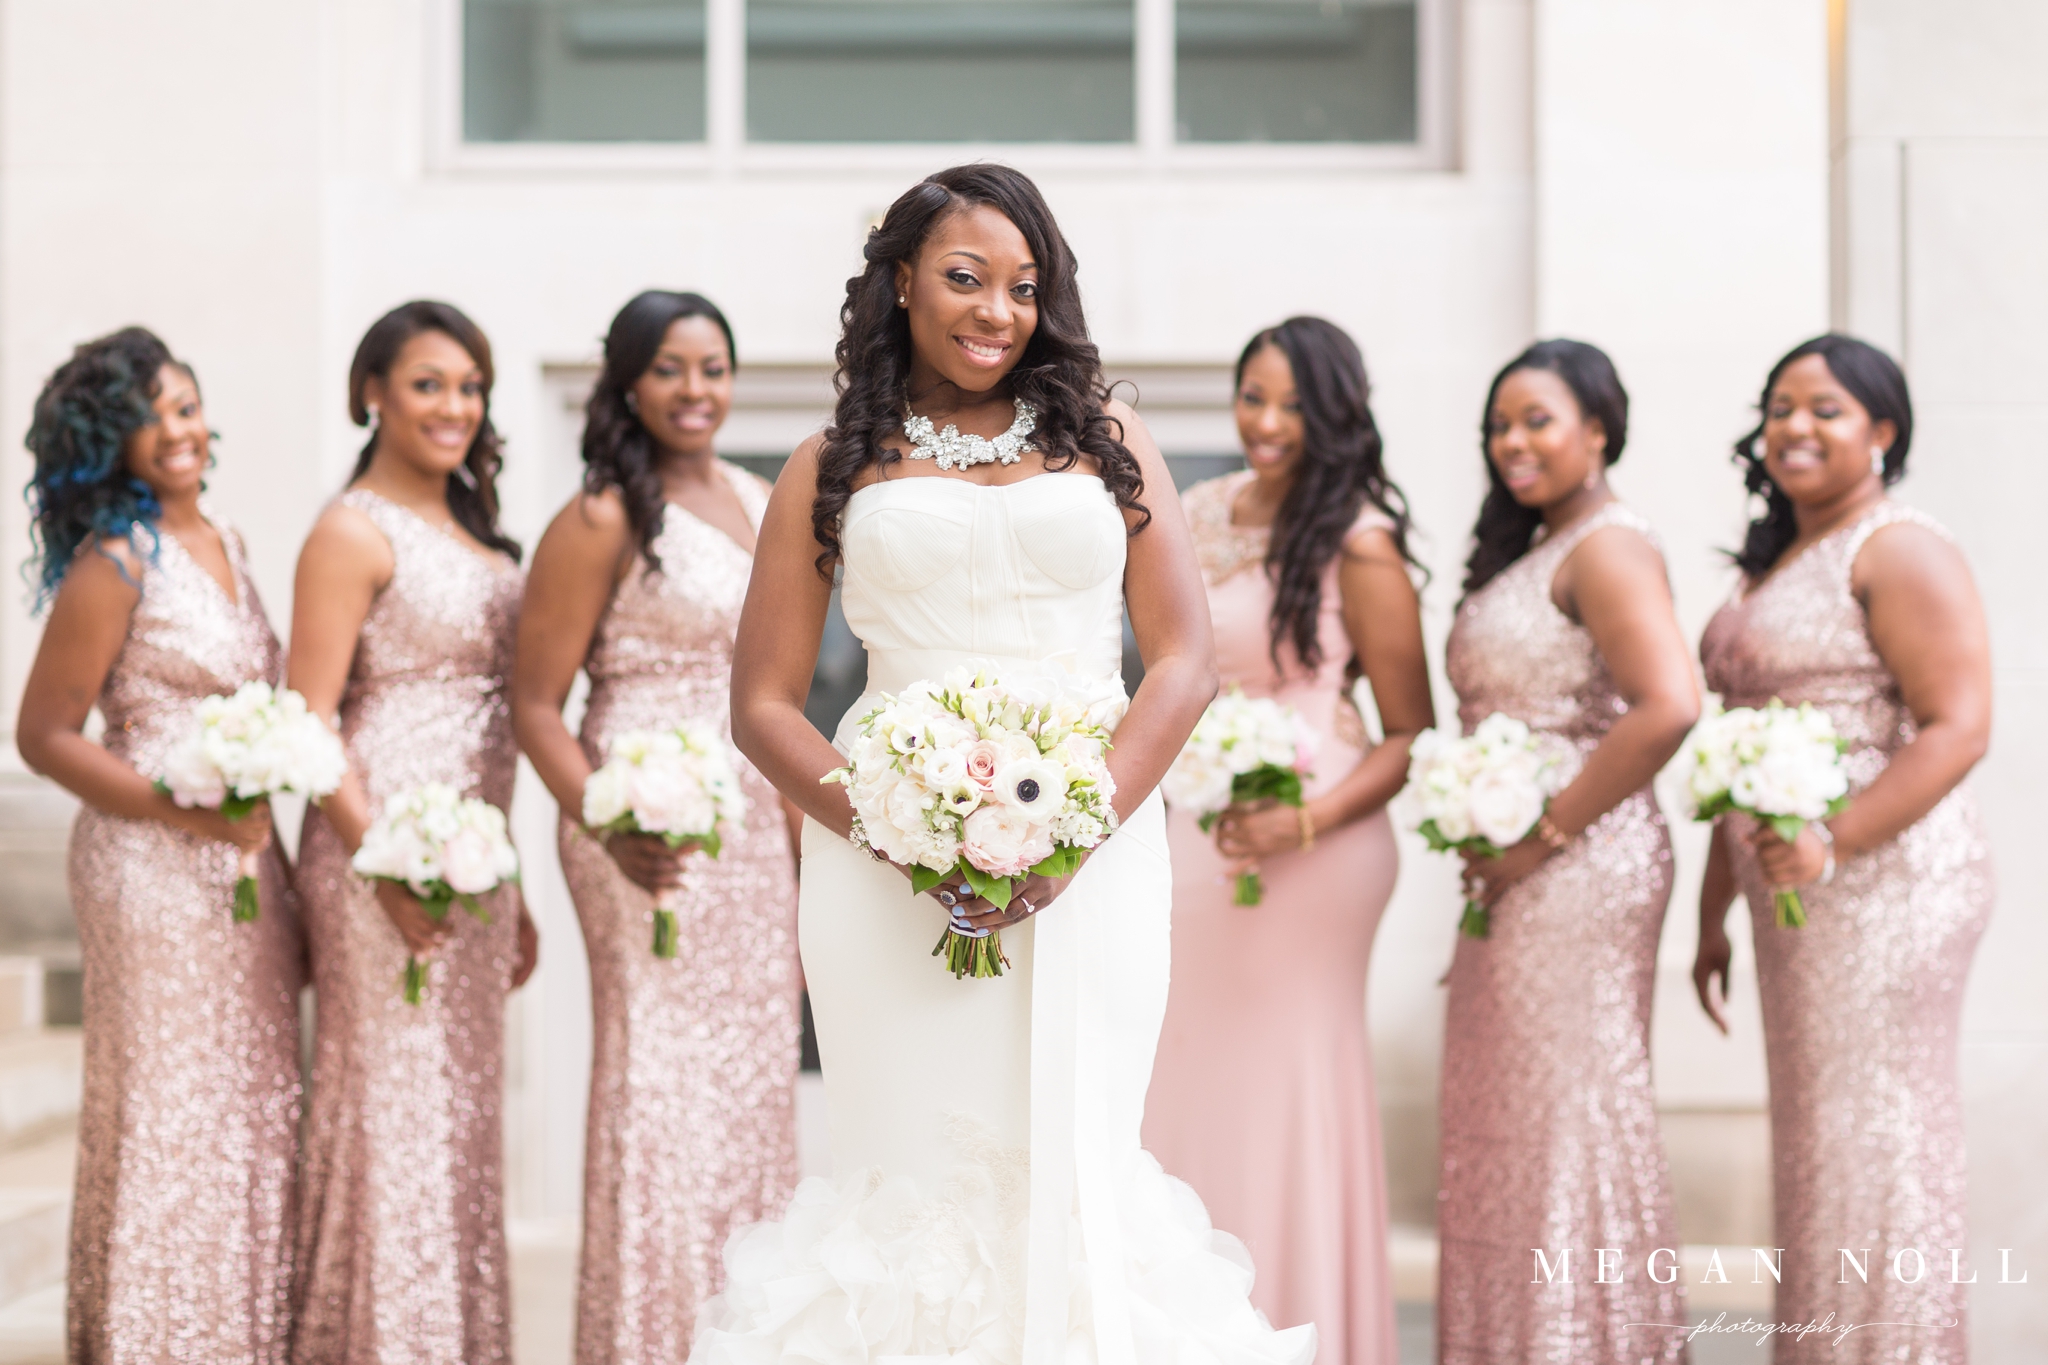 Best Bridal Party Pictures